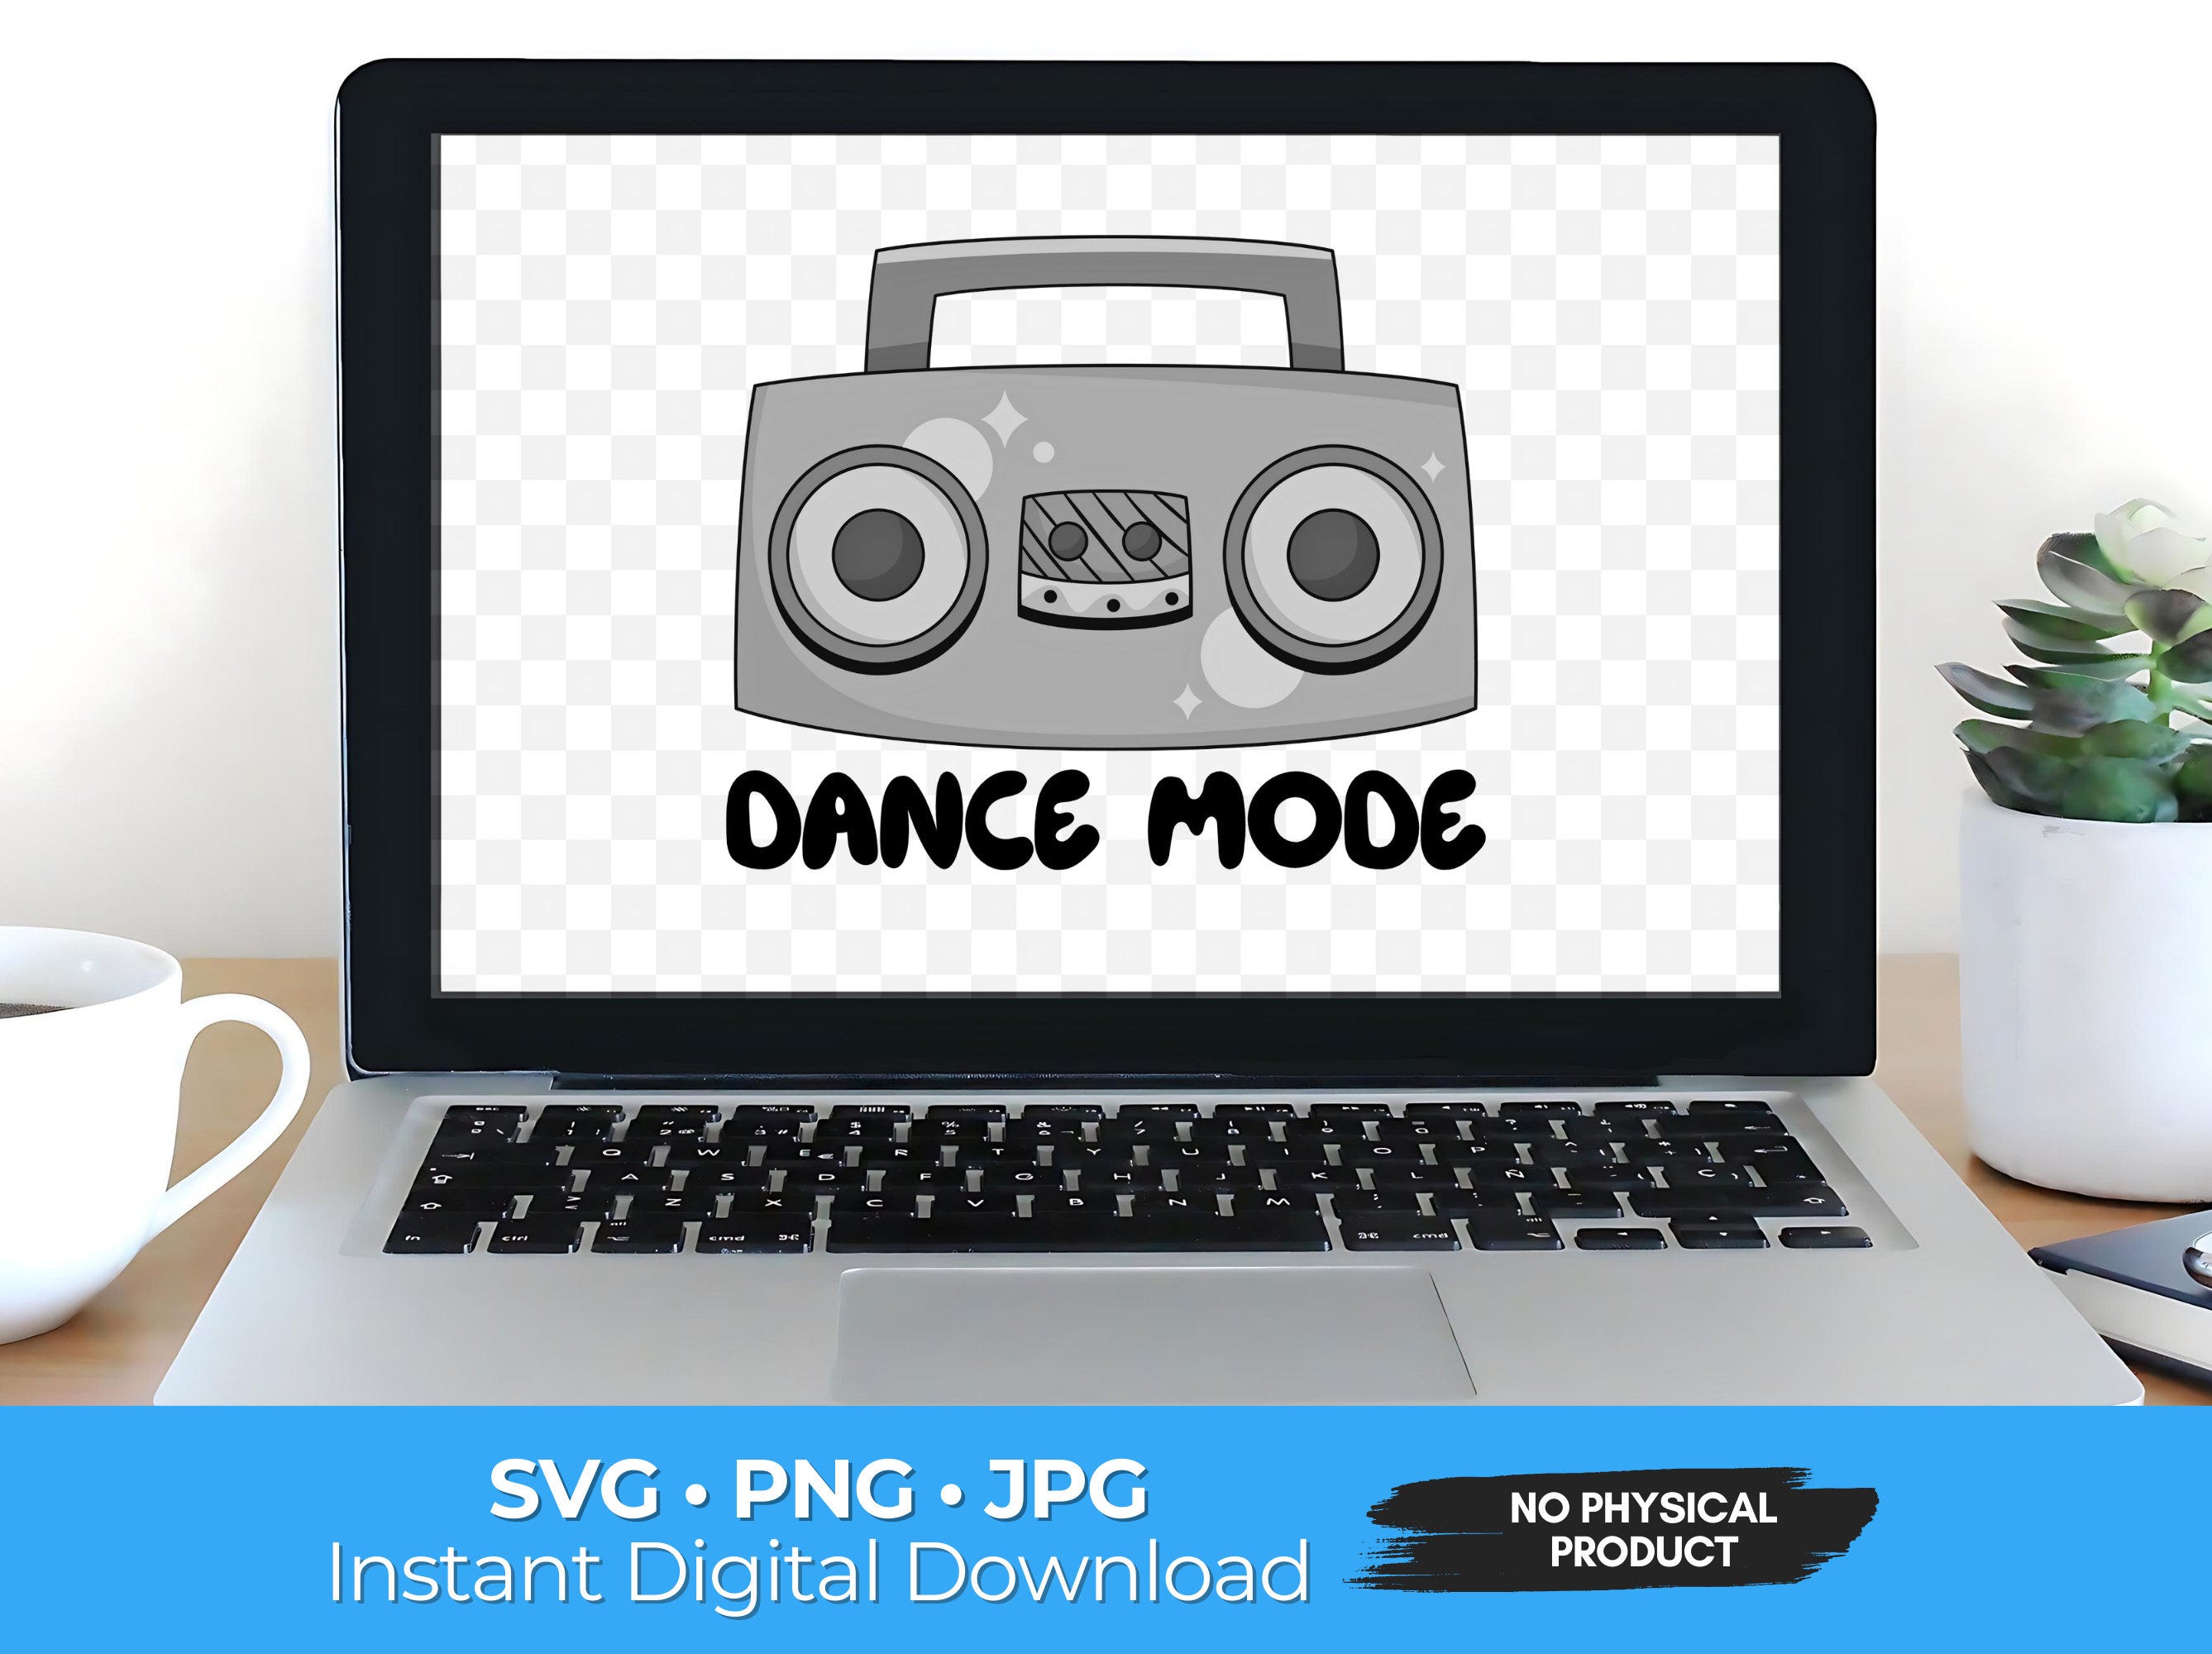 Bluey Dance Mode SVG PNG JPG Digital Downloads for T-Shirts, Bags, Tumblers & More + 10% Goes to Charity!